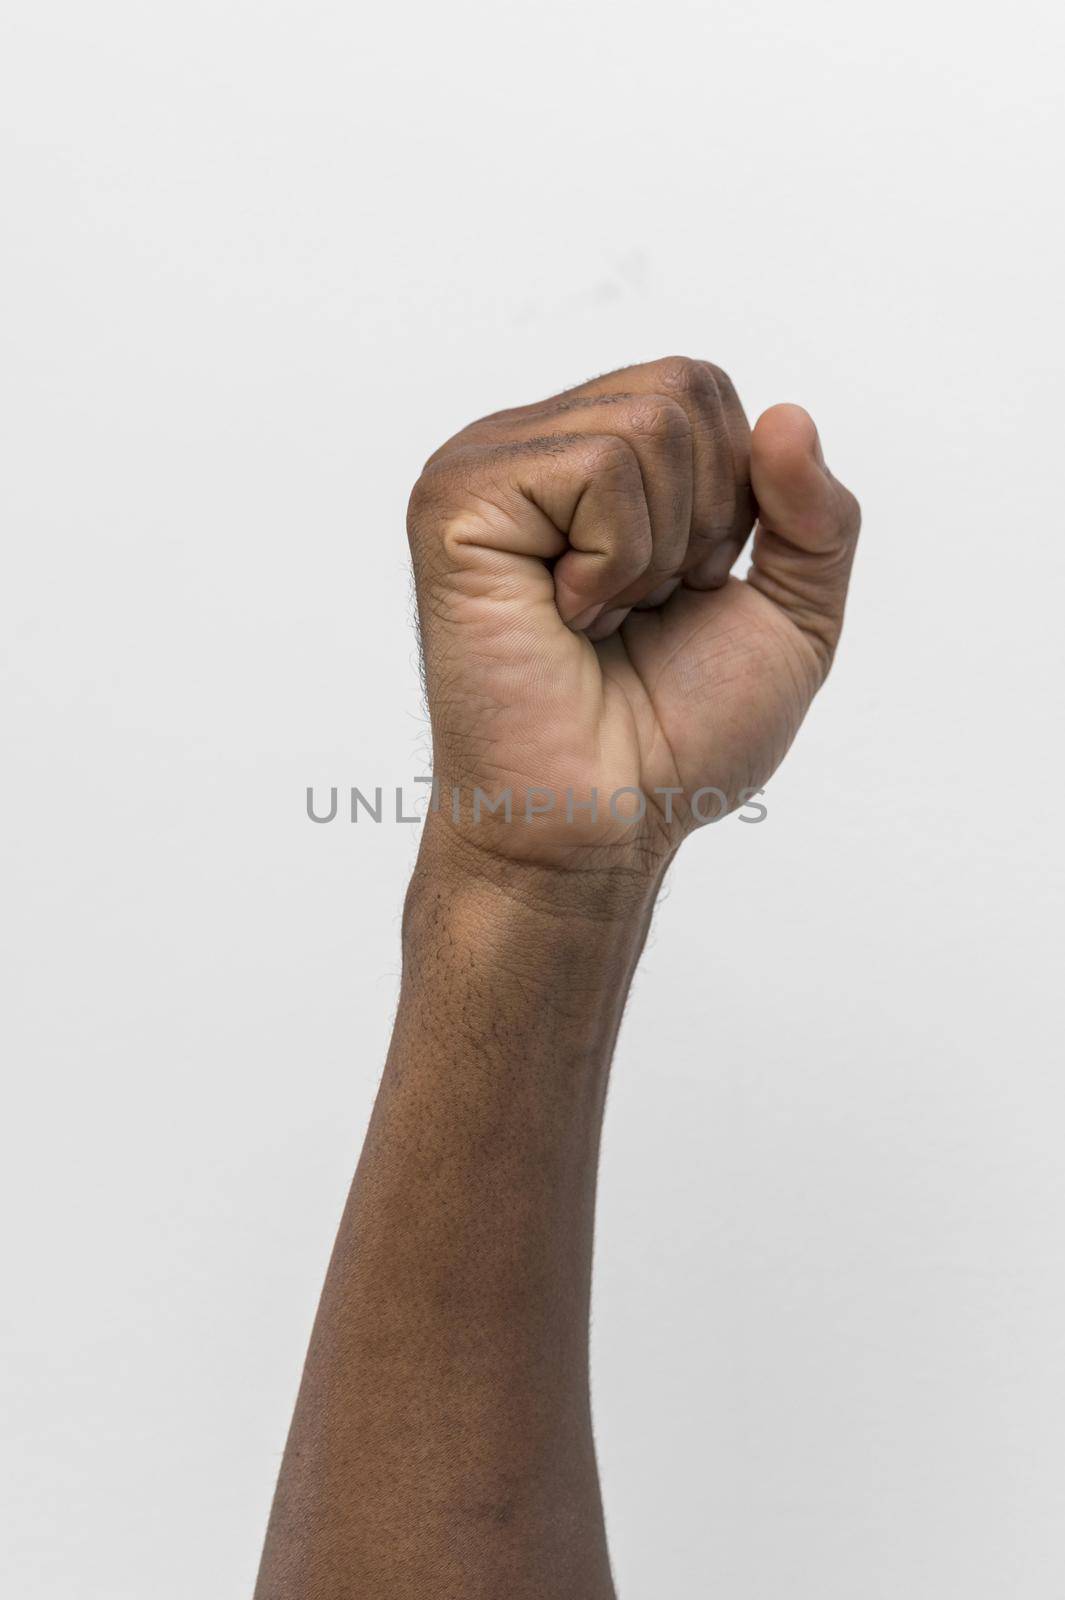 black person holding fist up (1) by Zahard